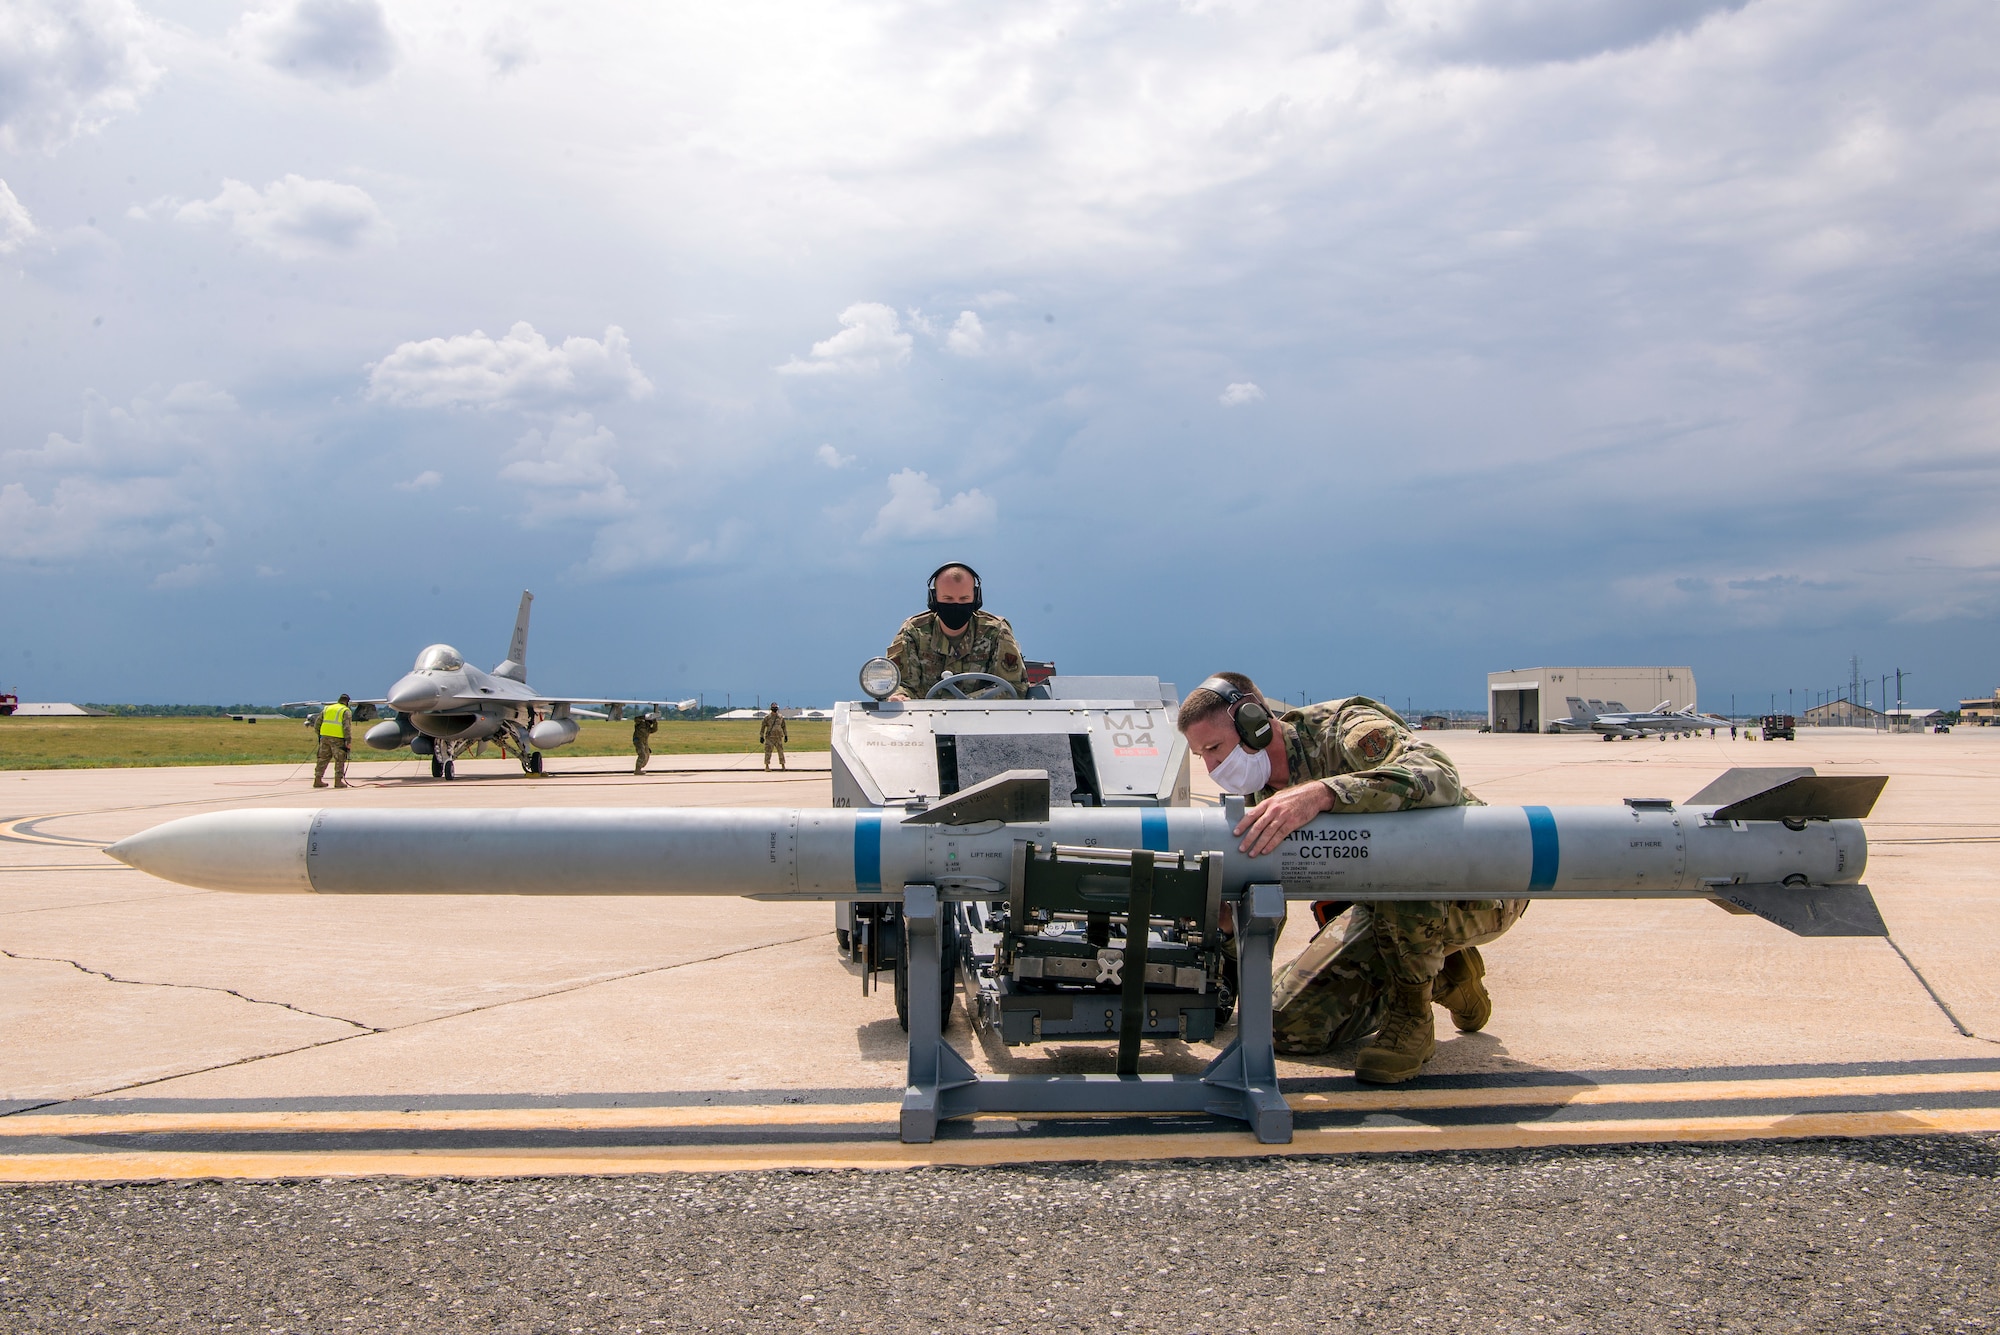 Two Airmen with a jammer and missile